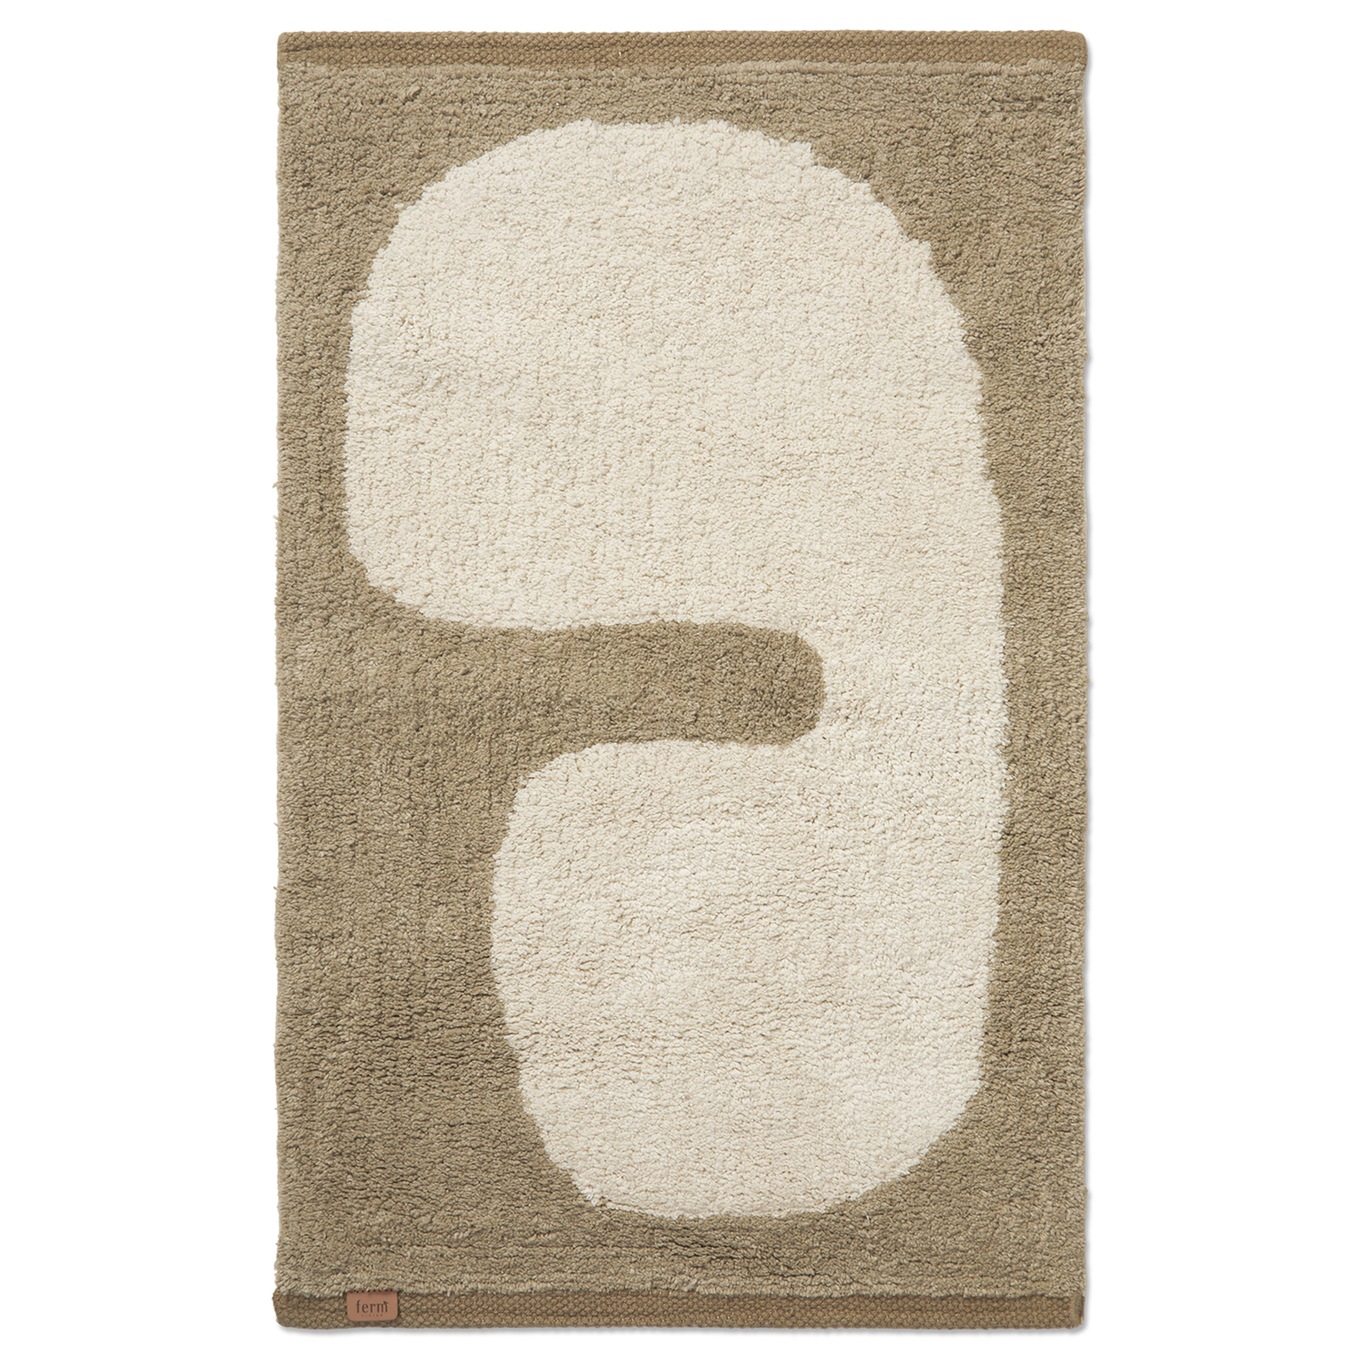 Lay Washable Rug 50x70 cm, Taupe/Off-white